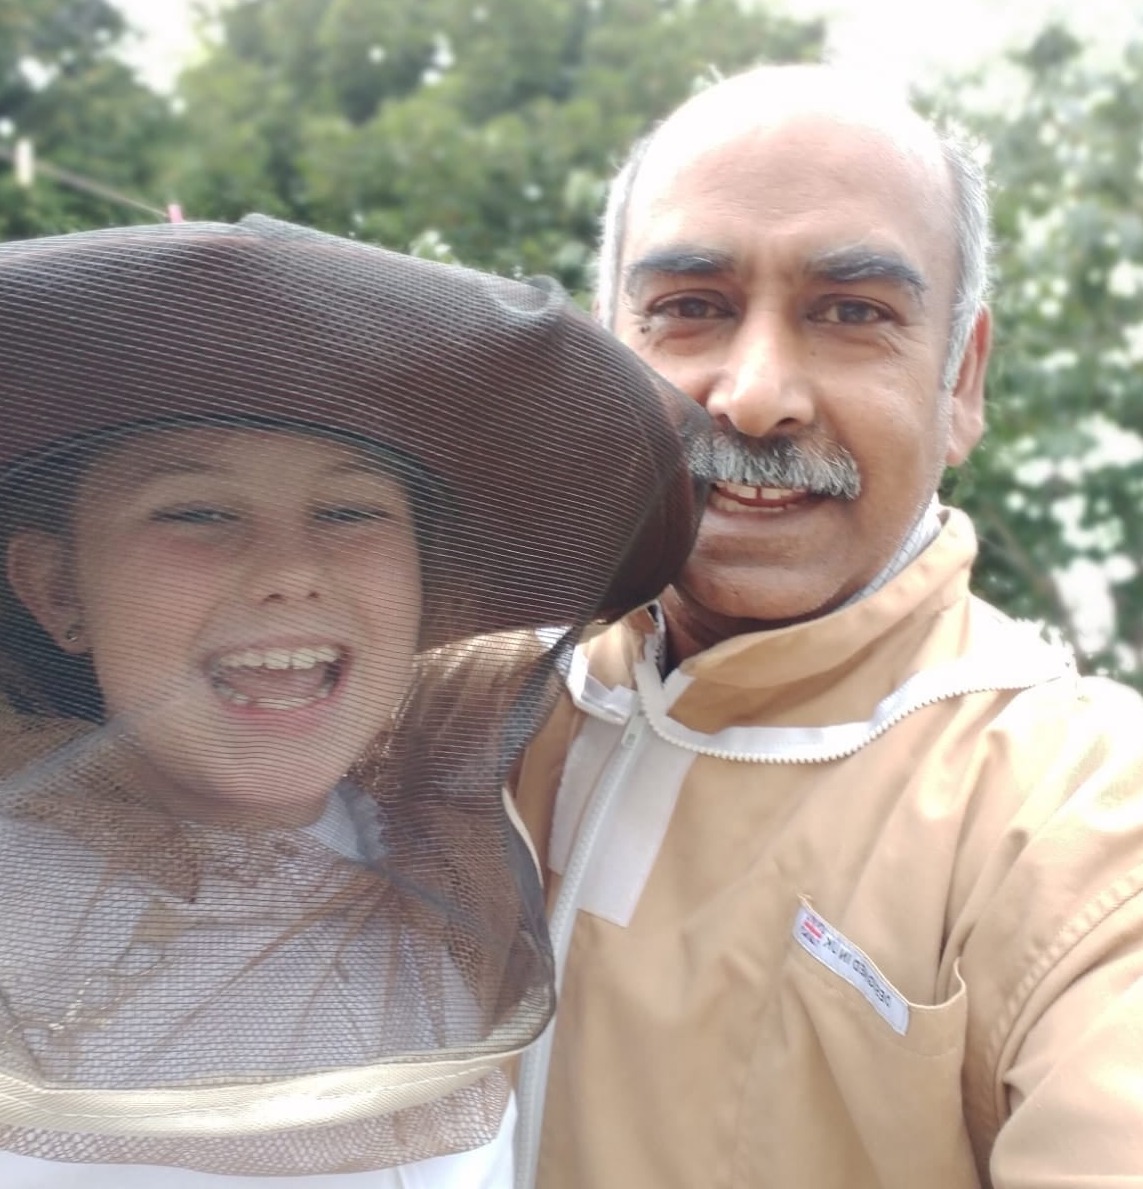 Beekeeper and her assistant